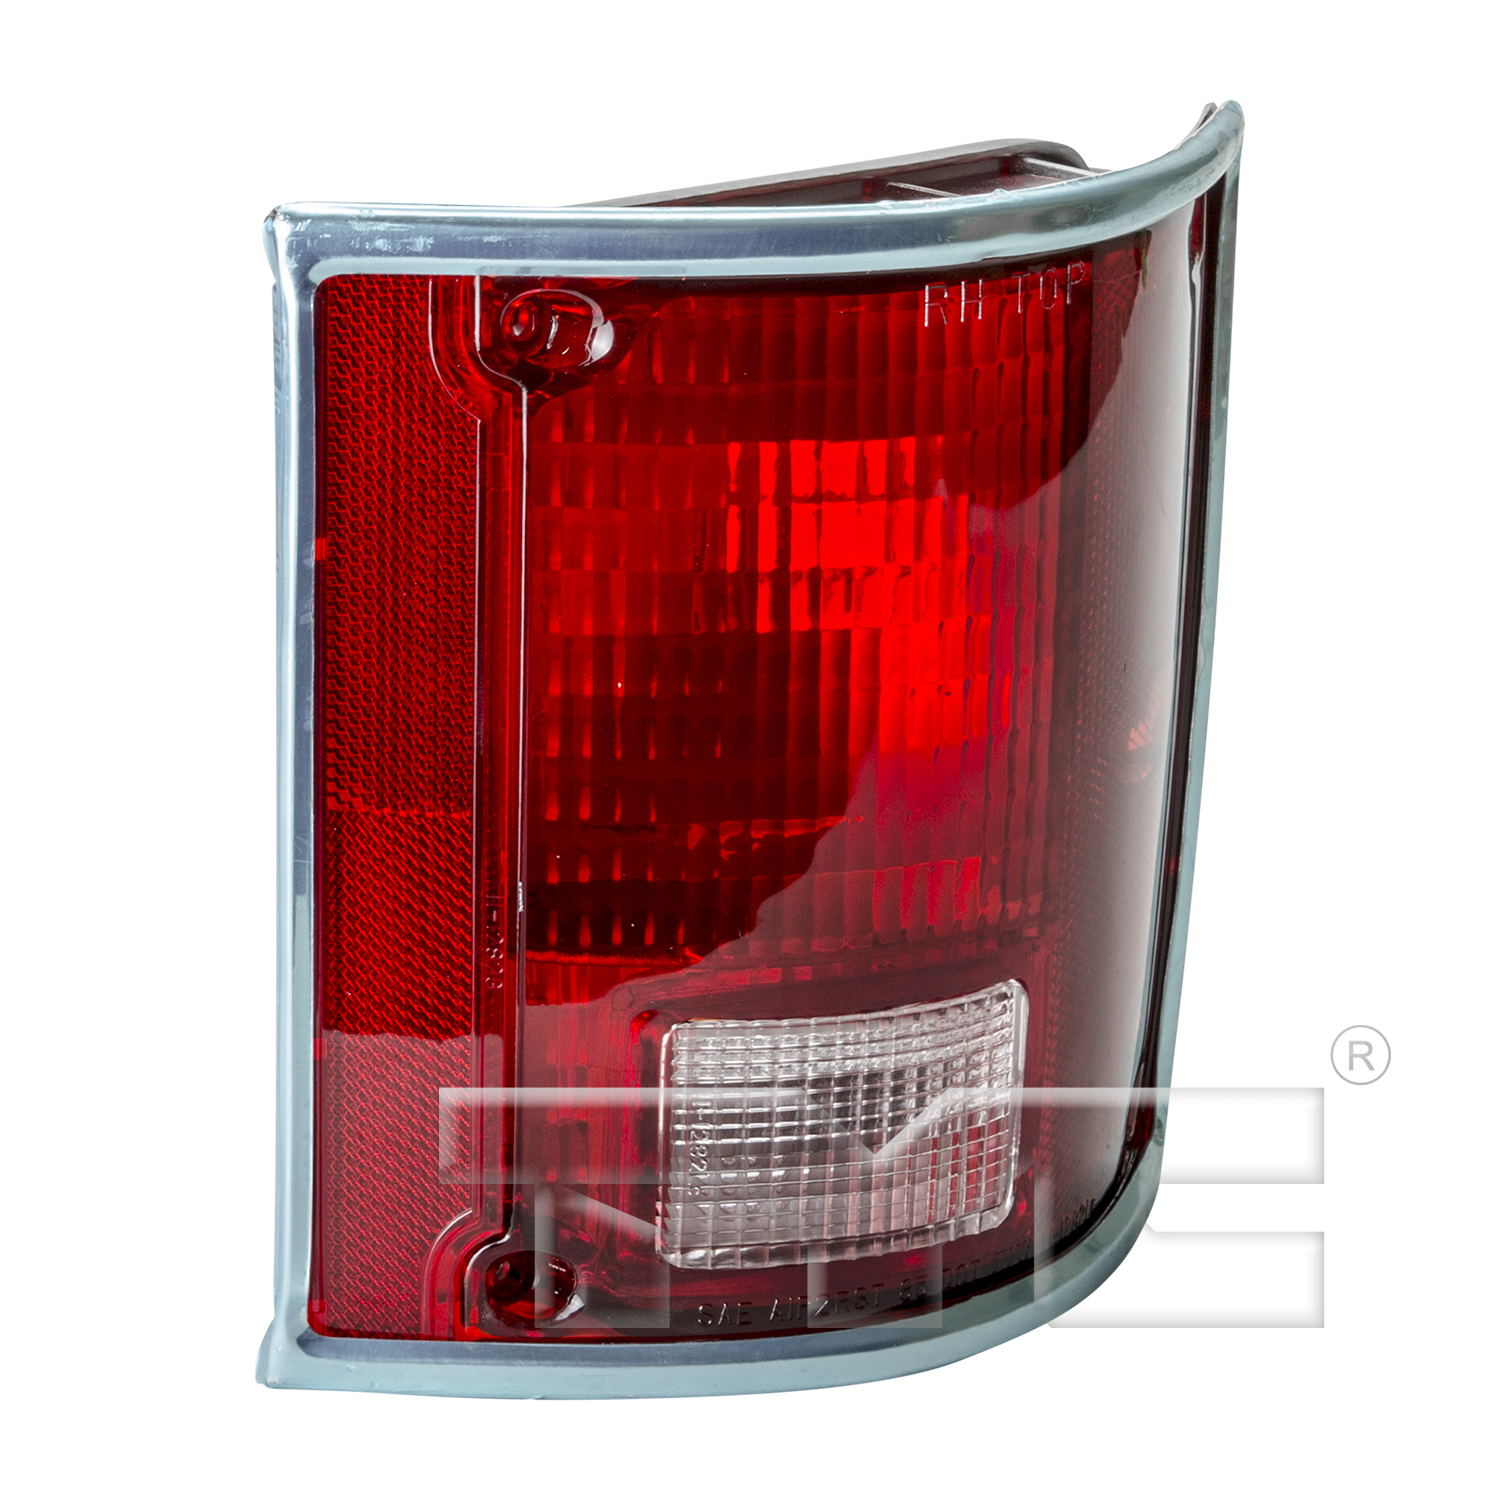 Aftermarket TAILLIGHTS for CHEVROLET - C1500, C1500,88-91,RT Taillamp assy